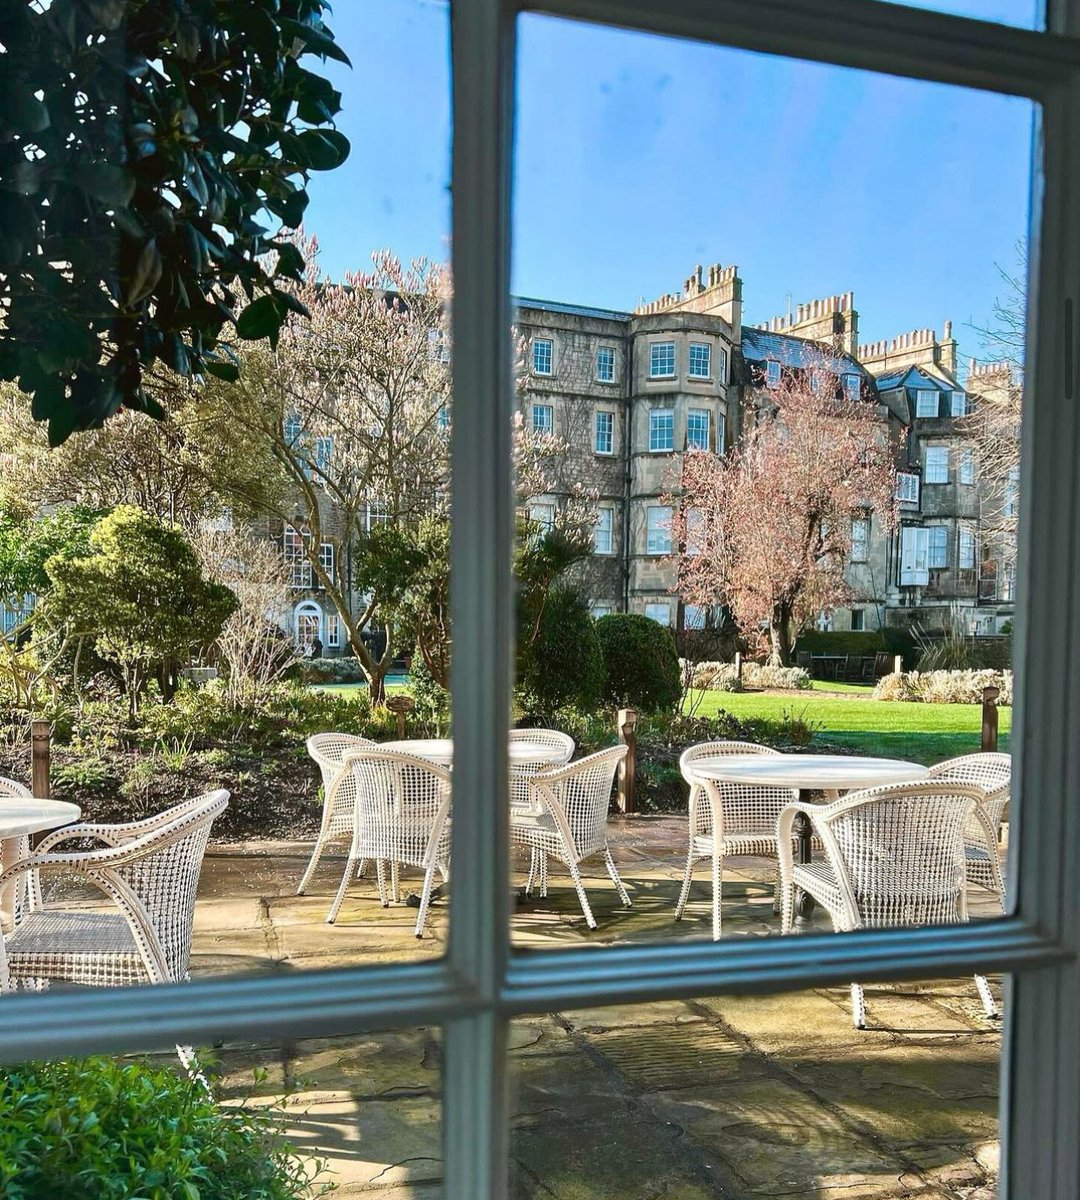 Spring sunshine in the private gardens here at The Royal Crescent Hotel & Spa 🌸 It’s wonderful to see the blossom on the trees, made even lovelier by the clear blue skies #bathuk #bathengland #luxuryhotel #royalcrescent